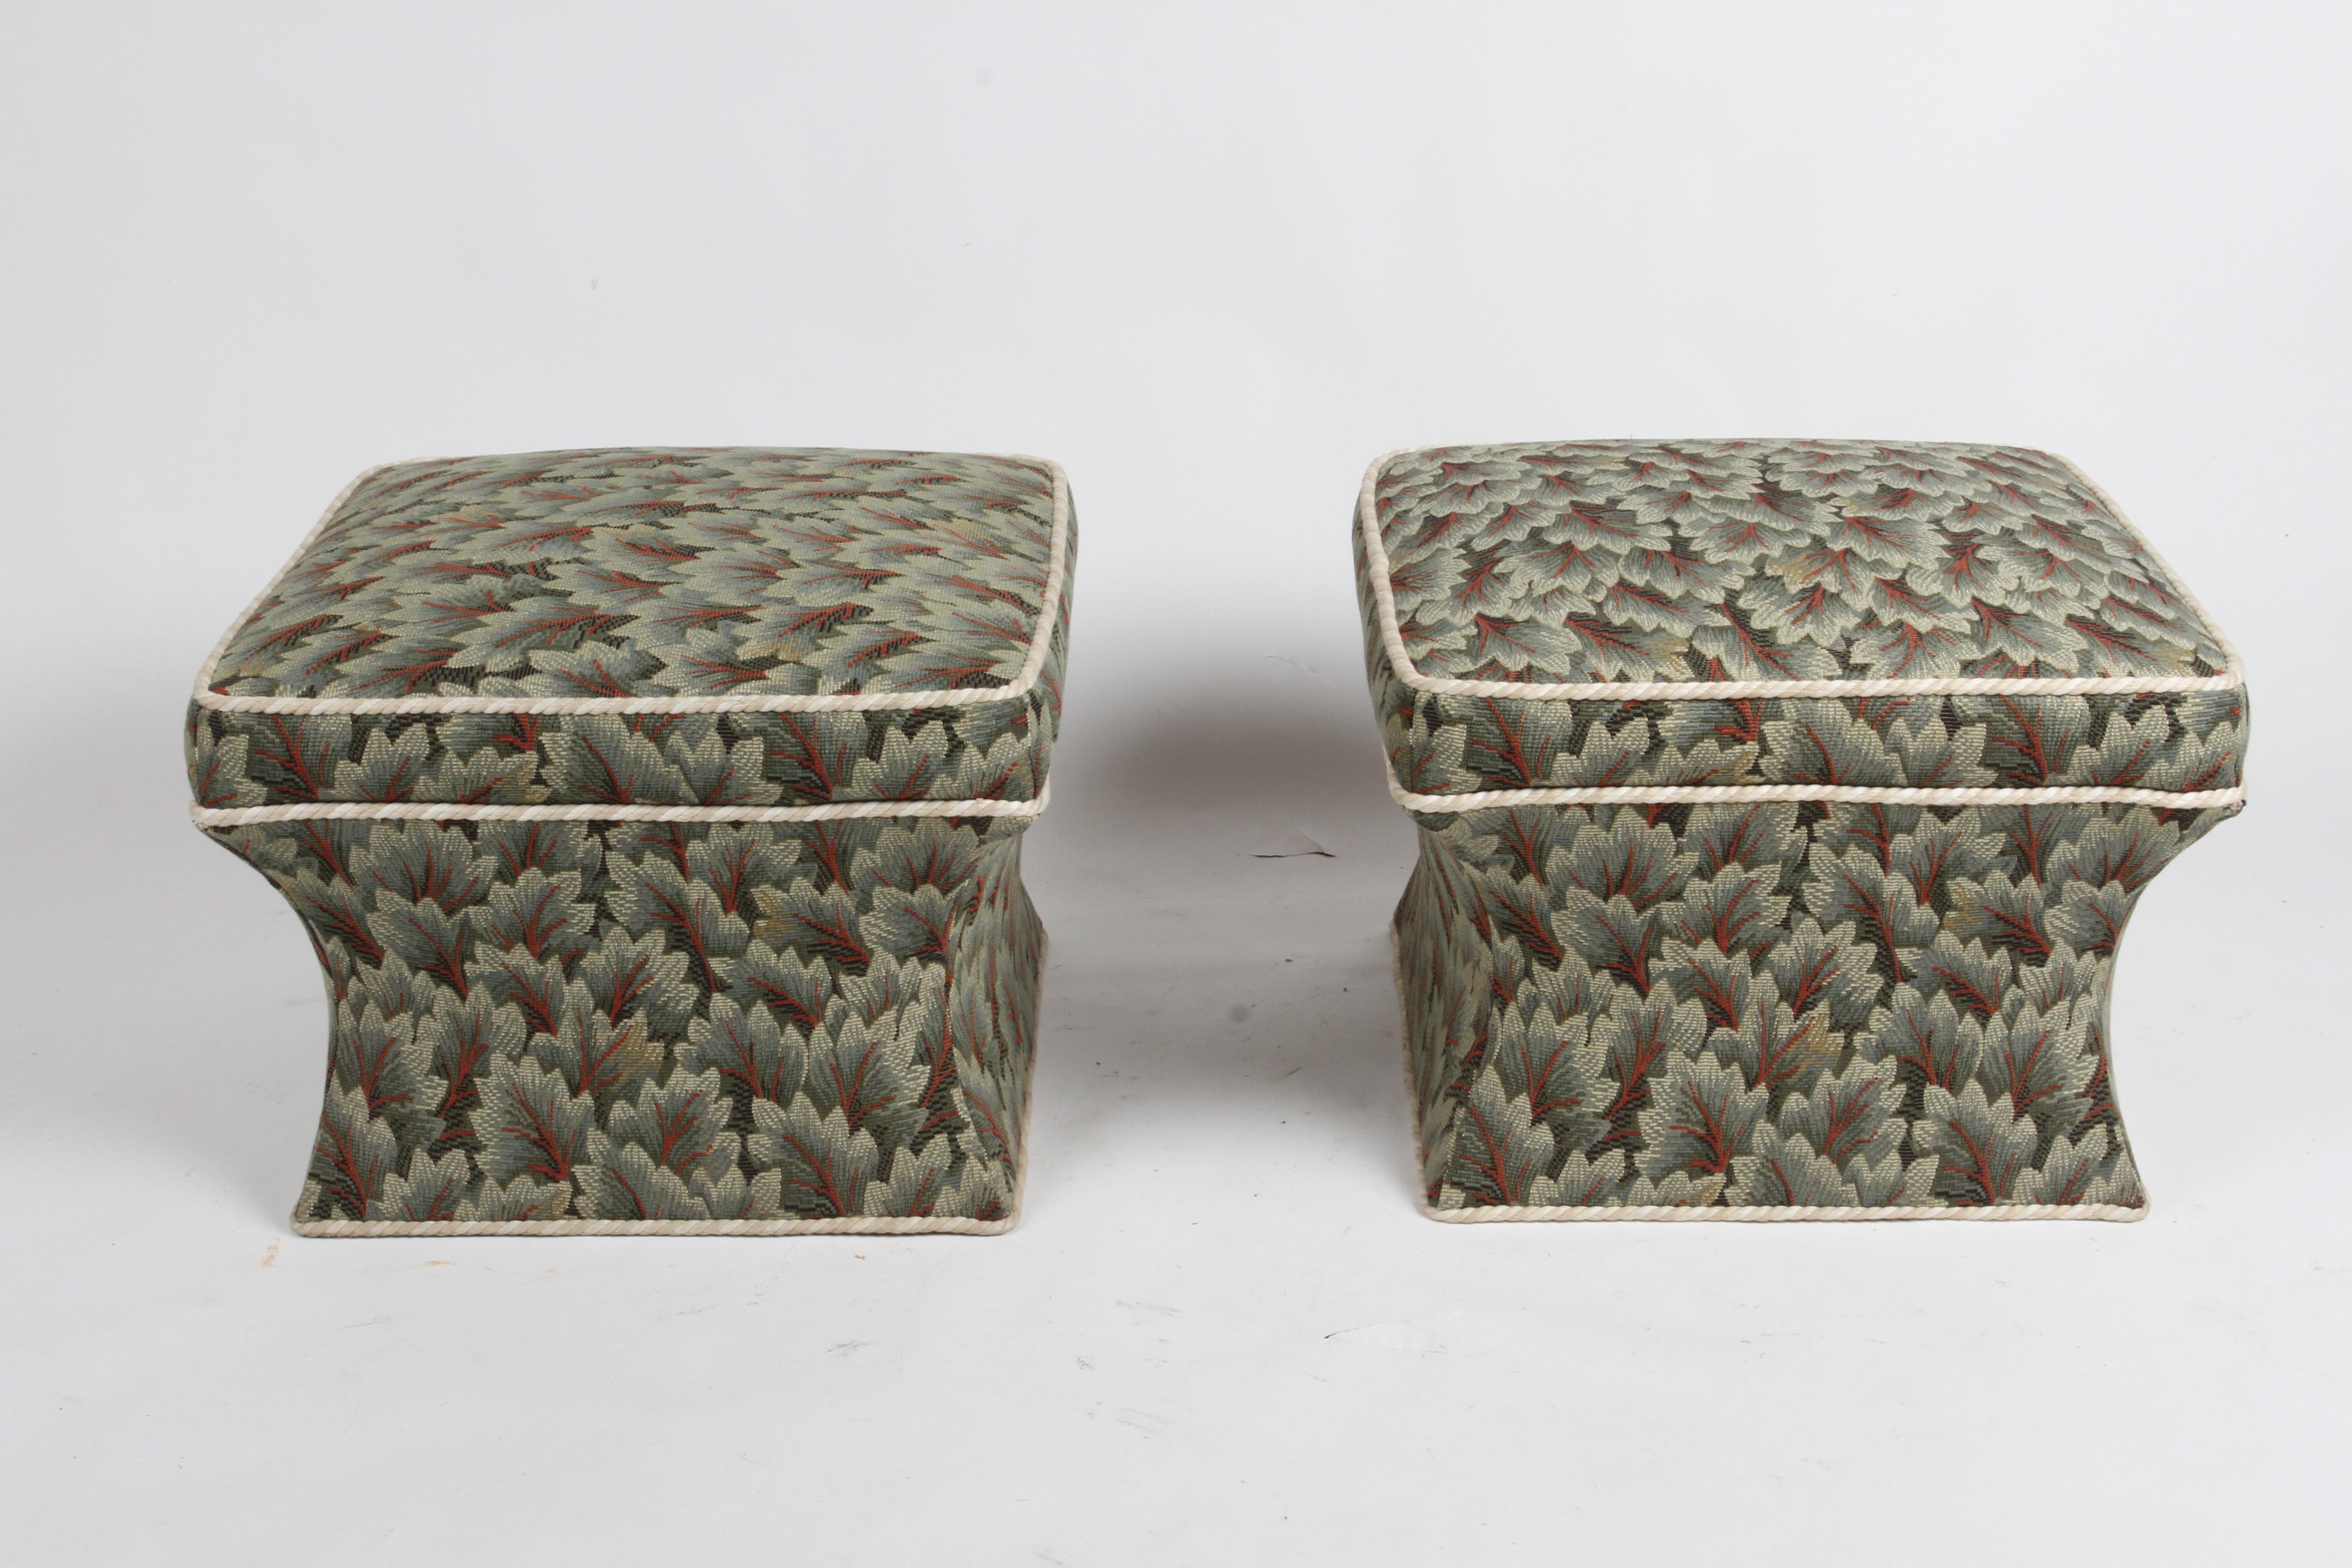 Pair of Baker Furniture Company sculpted ottomans or poufs circa late 1970s or early 1980s with vintage Chintz floral and rope welt upholstery. I think the form of these are stunning, I would update the upholstery, but according to the New York